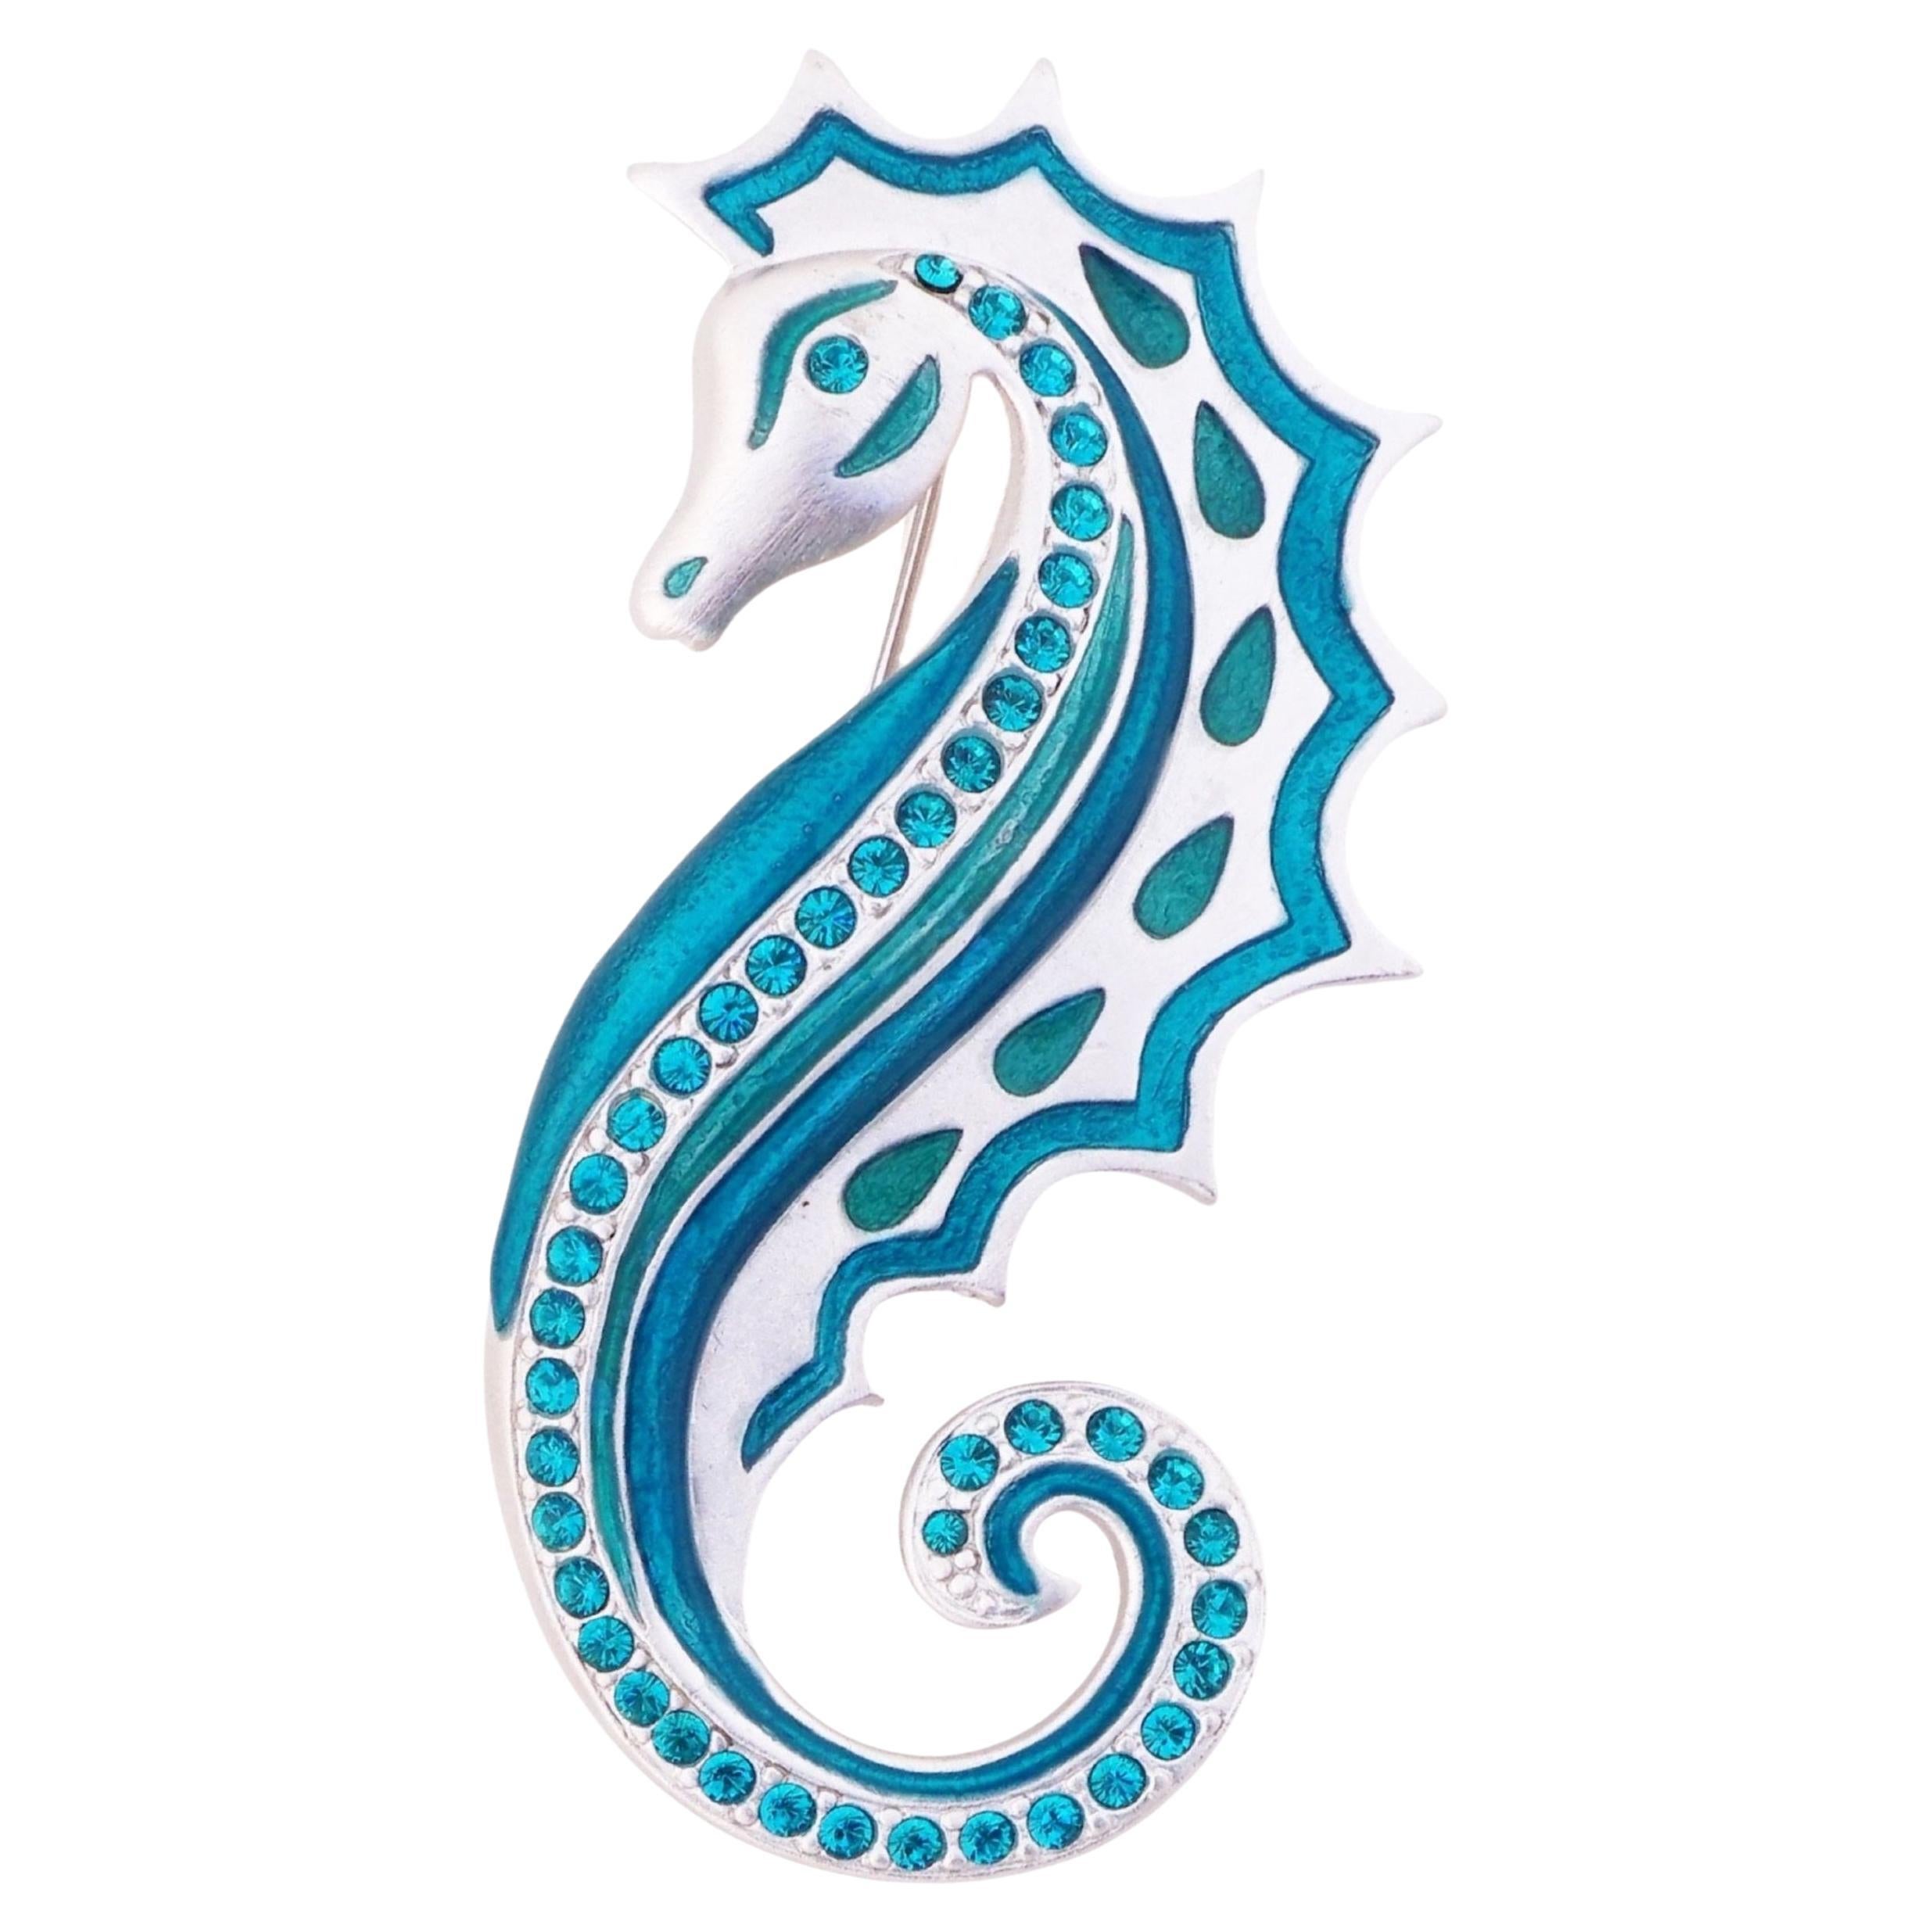 Silver Seahorse Figural Brooch With Teal Enamel & Crystals By Bob Mackie, 1980s